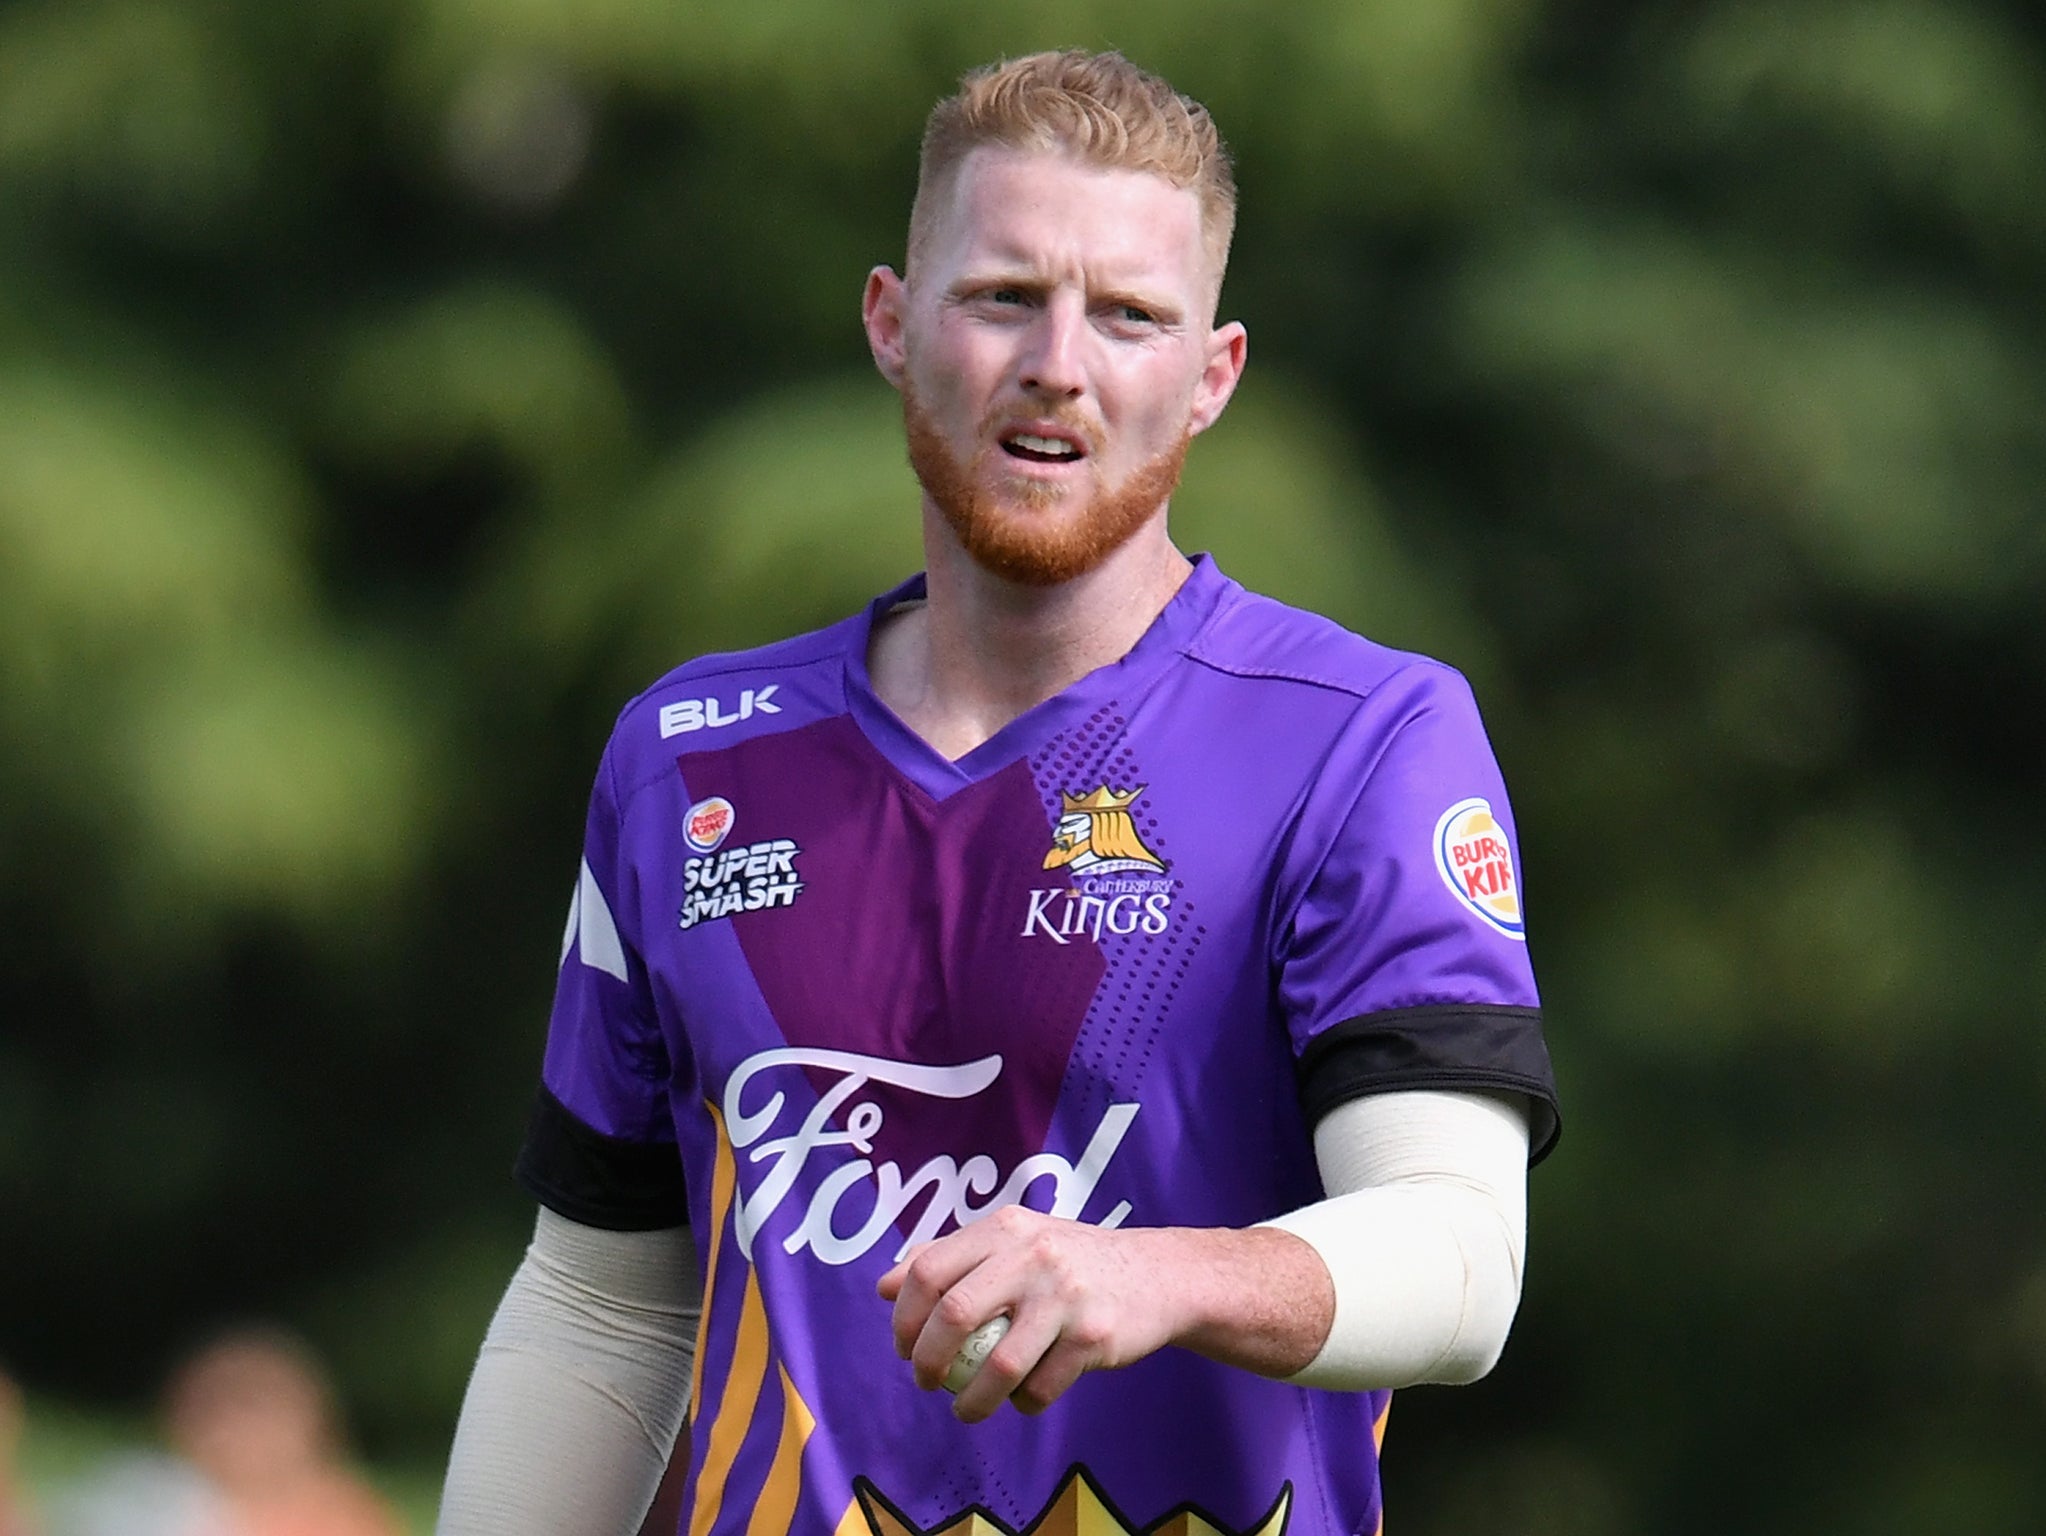 Ben Stokes is set to be handsomely rewarded in the IPL - but he won't be the only one